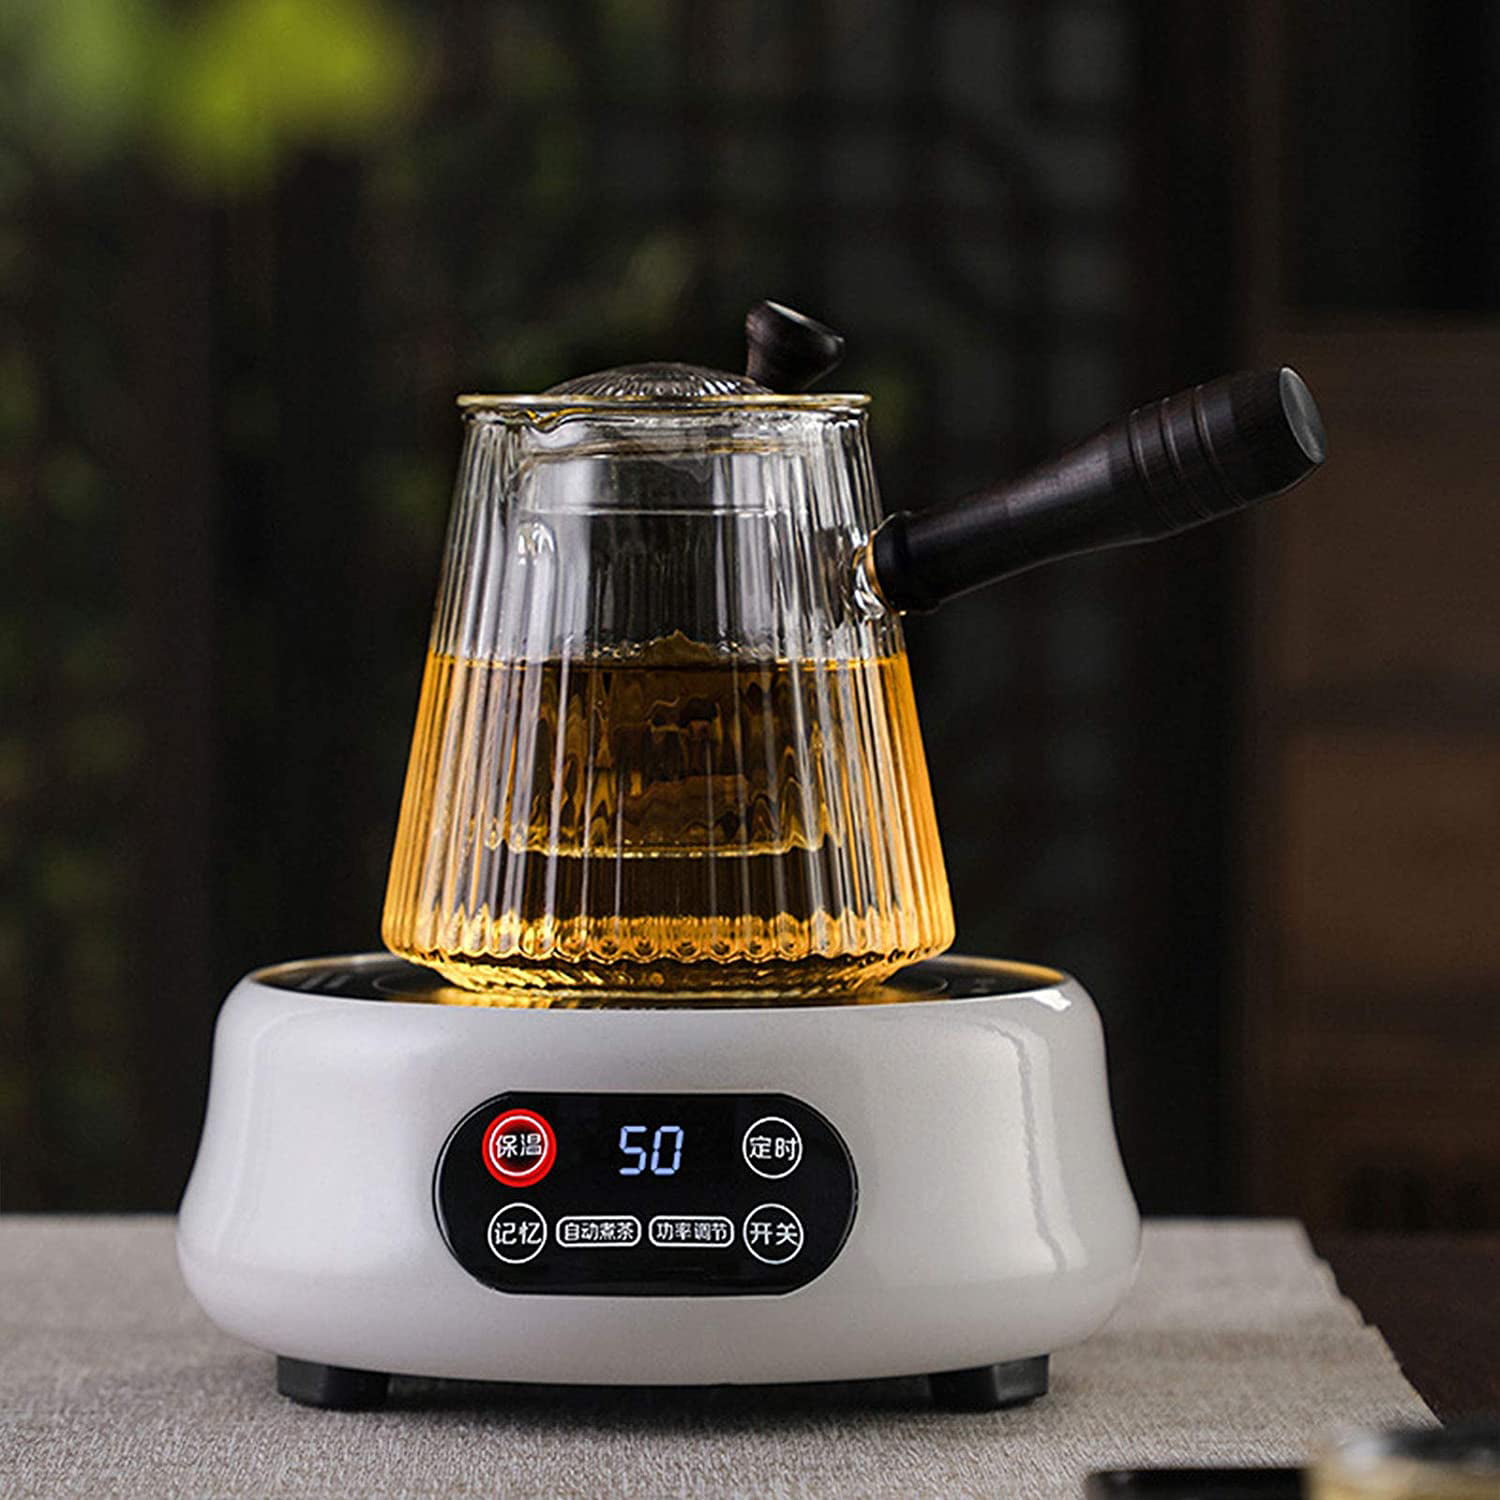 Portable Electric Mini Stove Hot Pot Heating Plate Cooking Coffee Heater  1300W